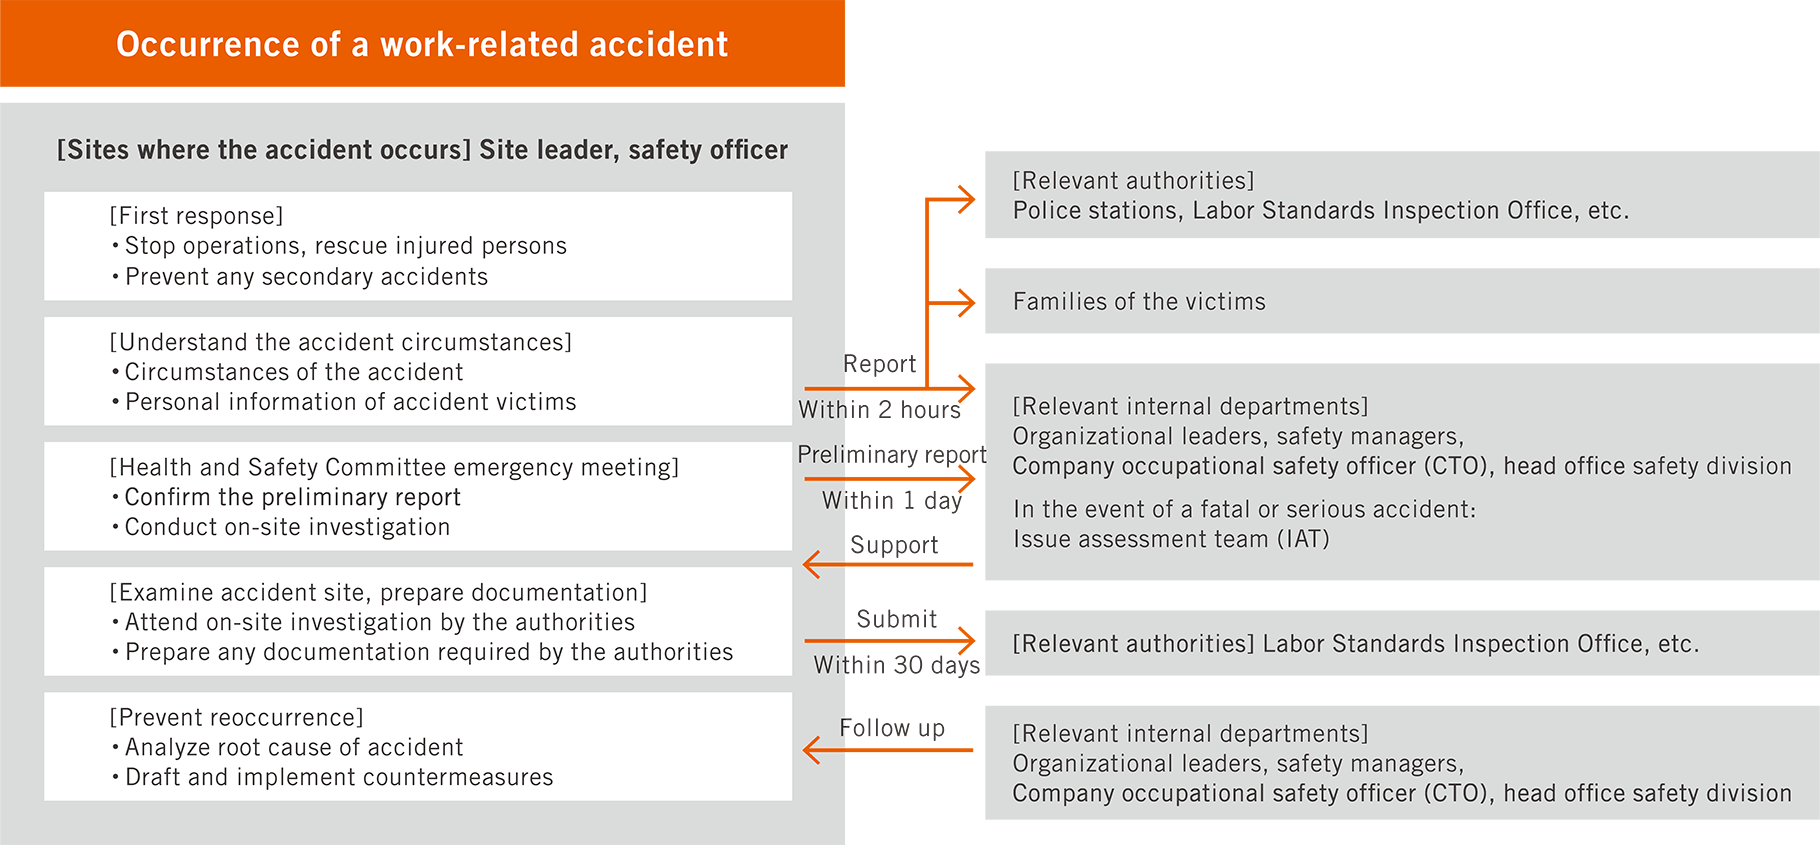 How to Respond to Occupational Accidents